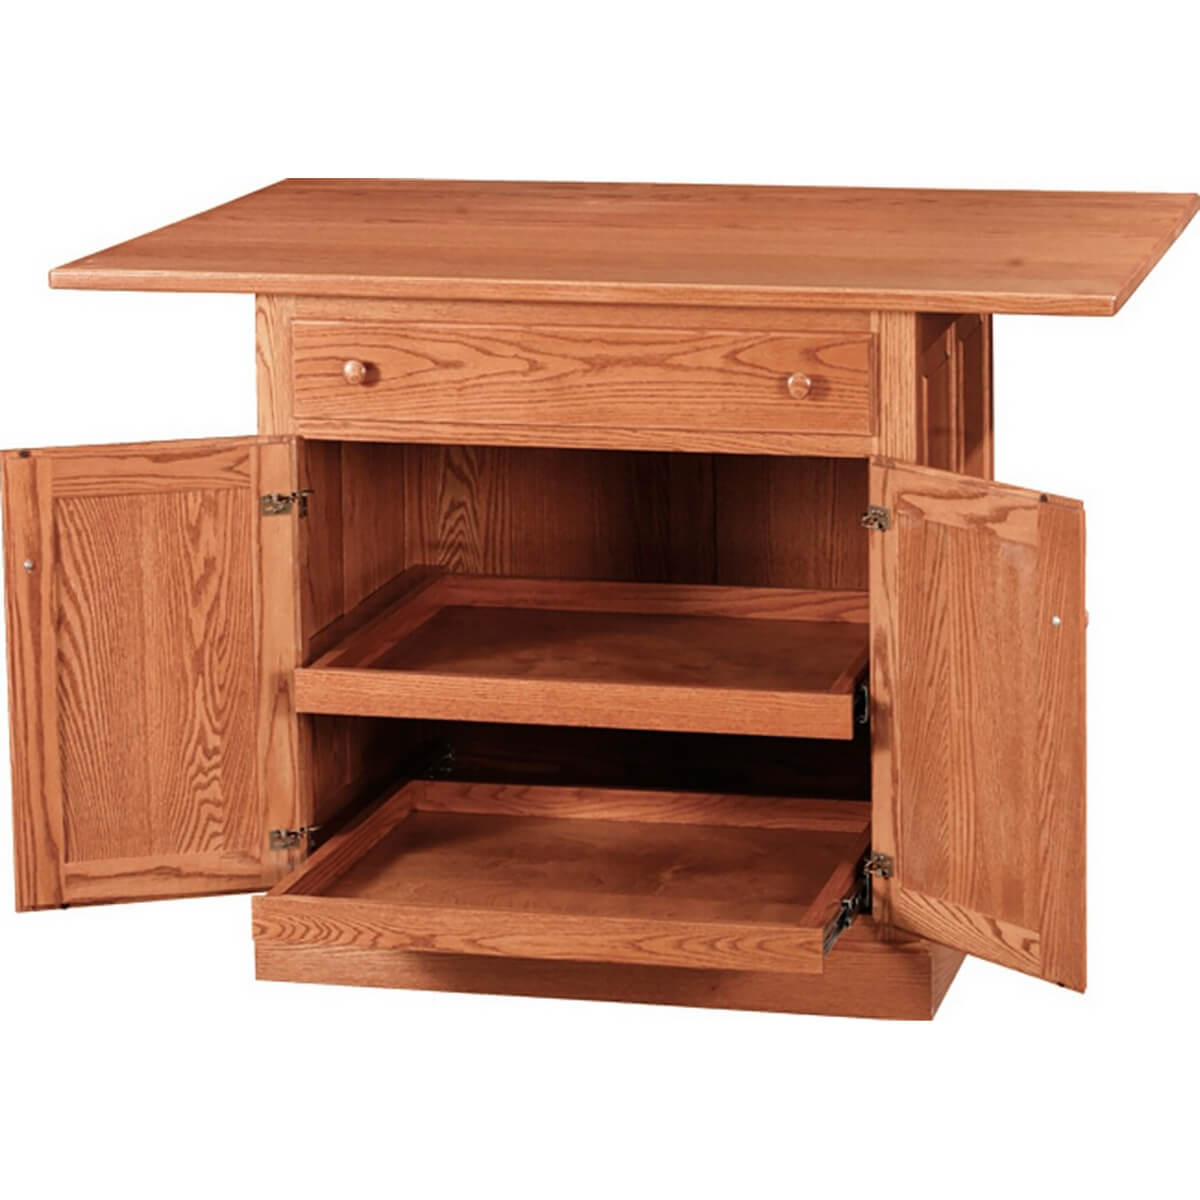 Read more about the article Traditional Raised Panel Kitchen Island Cabinet with Slide-Out Shelves